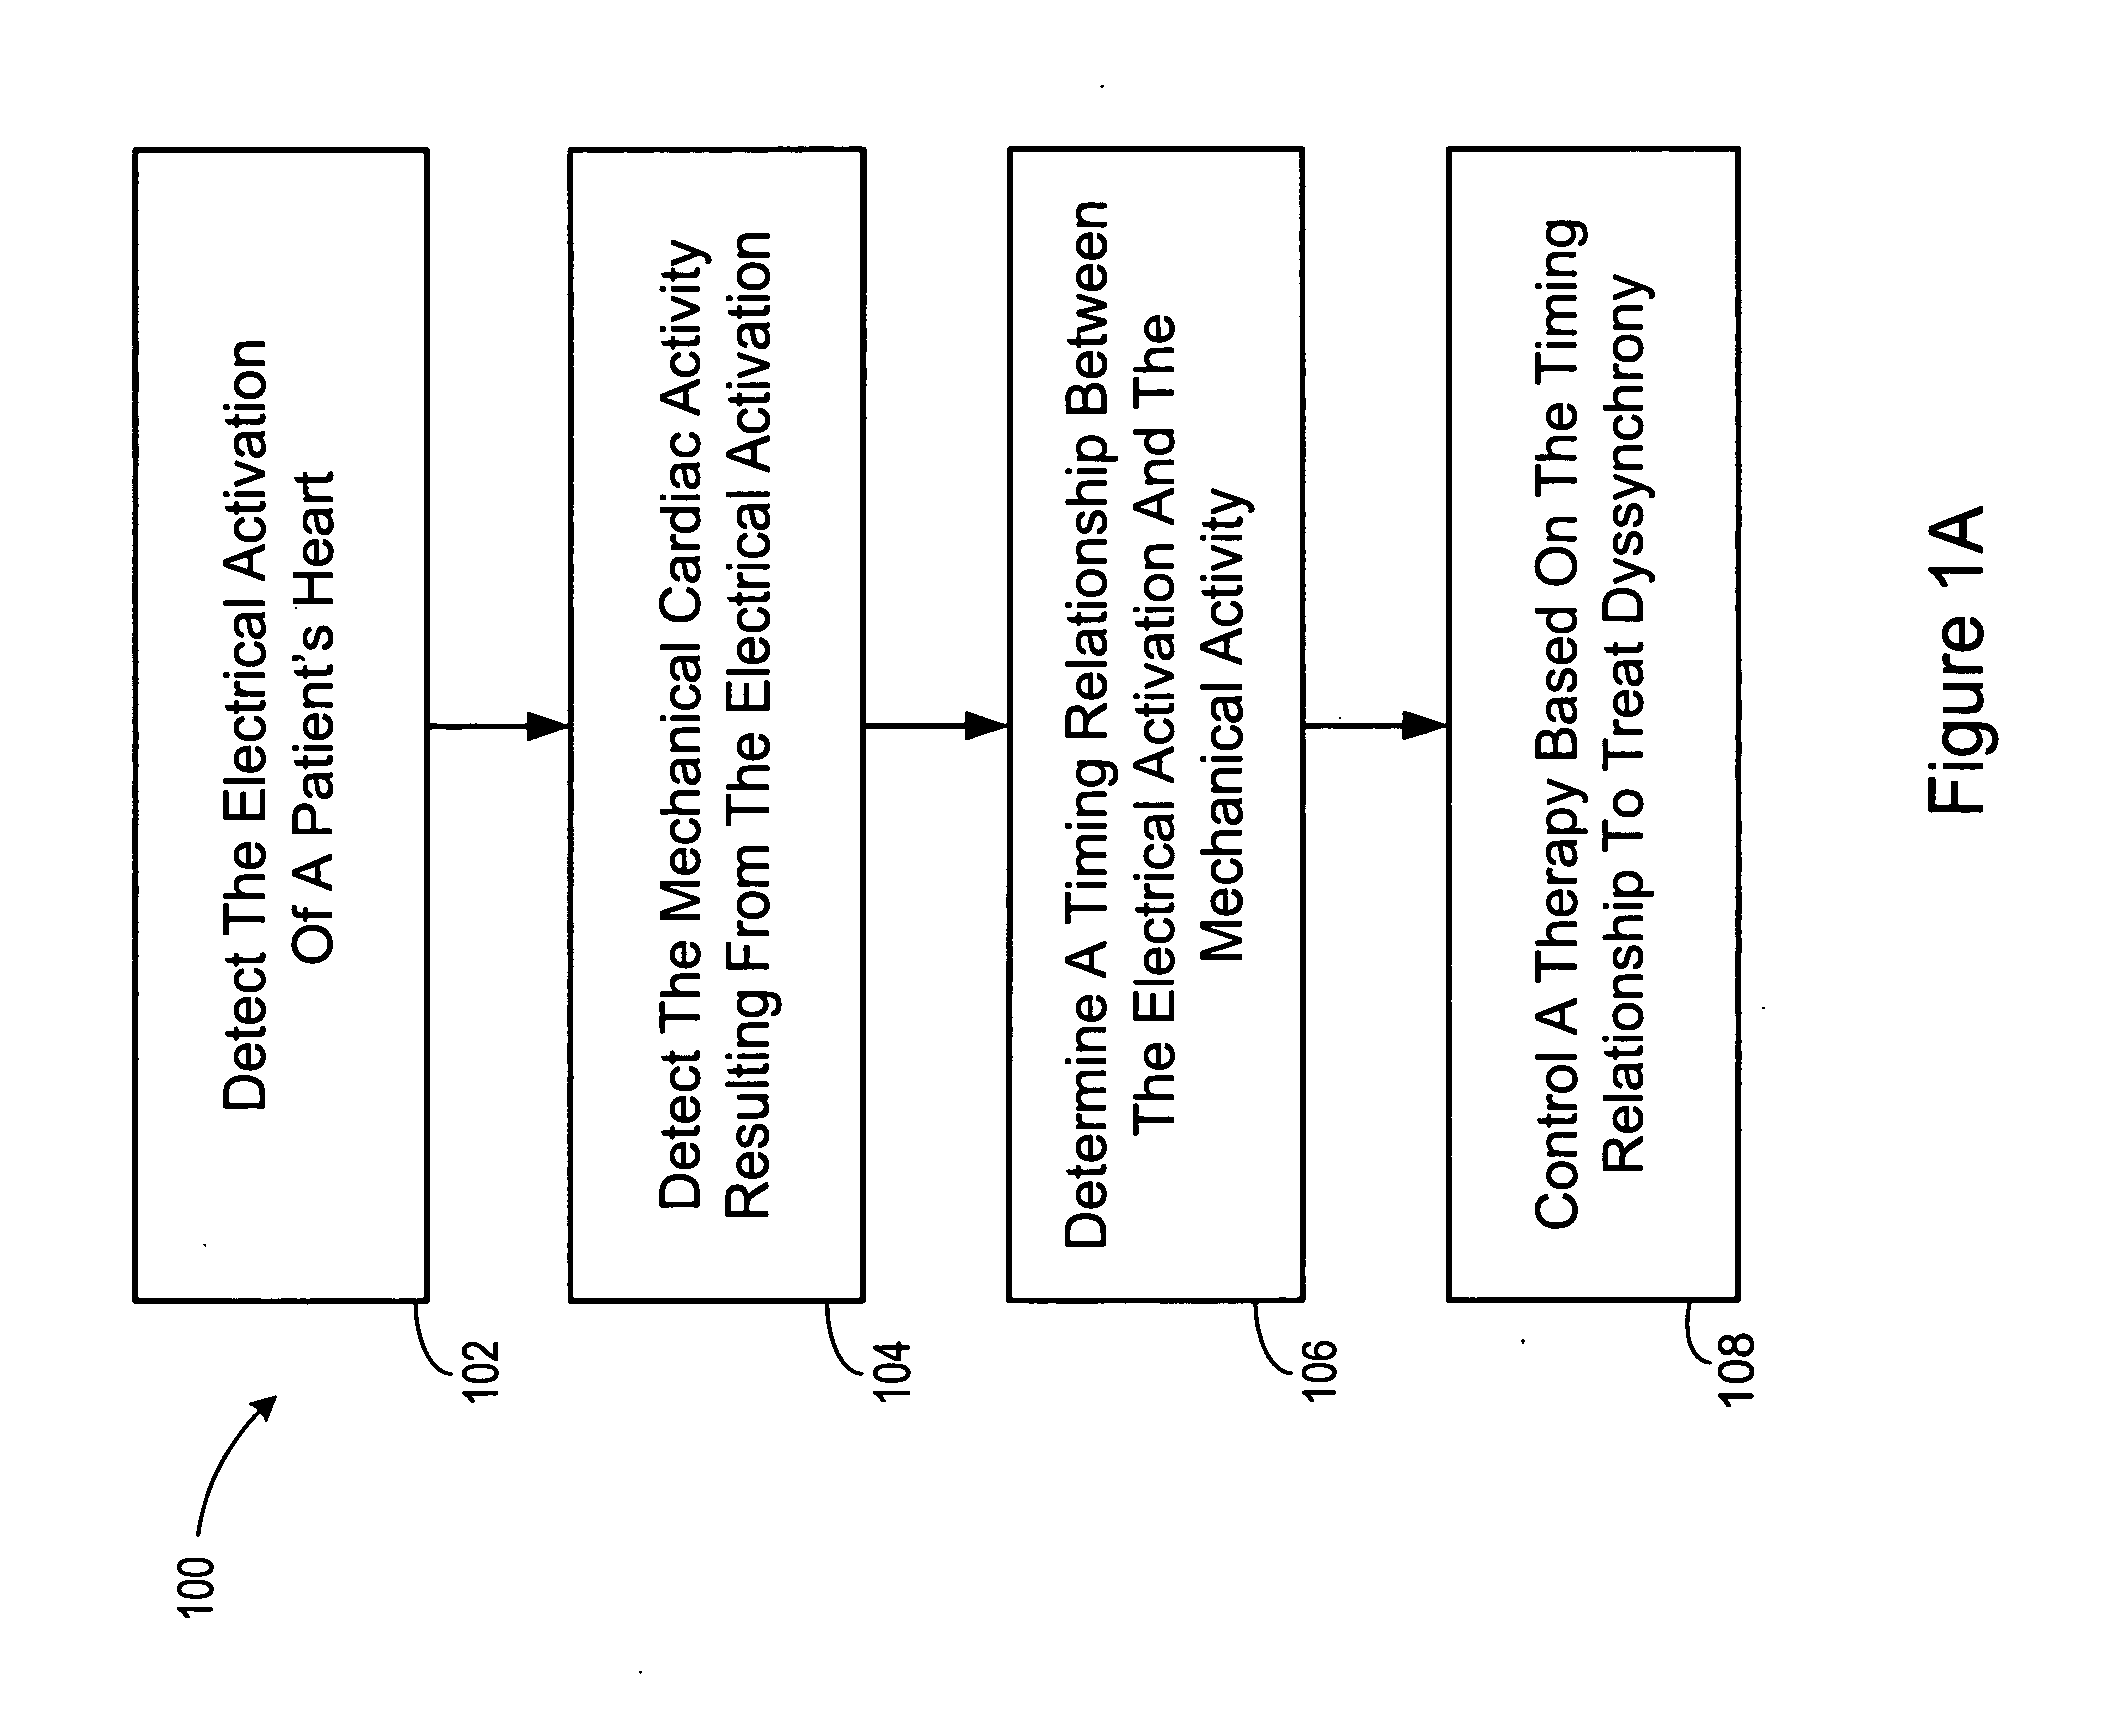 Method and apparatus for controlling cardiac therapy based on electromechanical timing